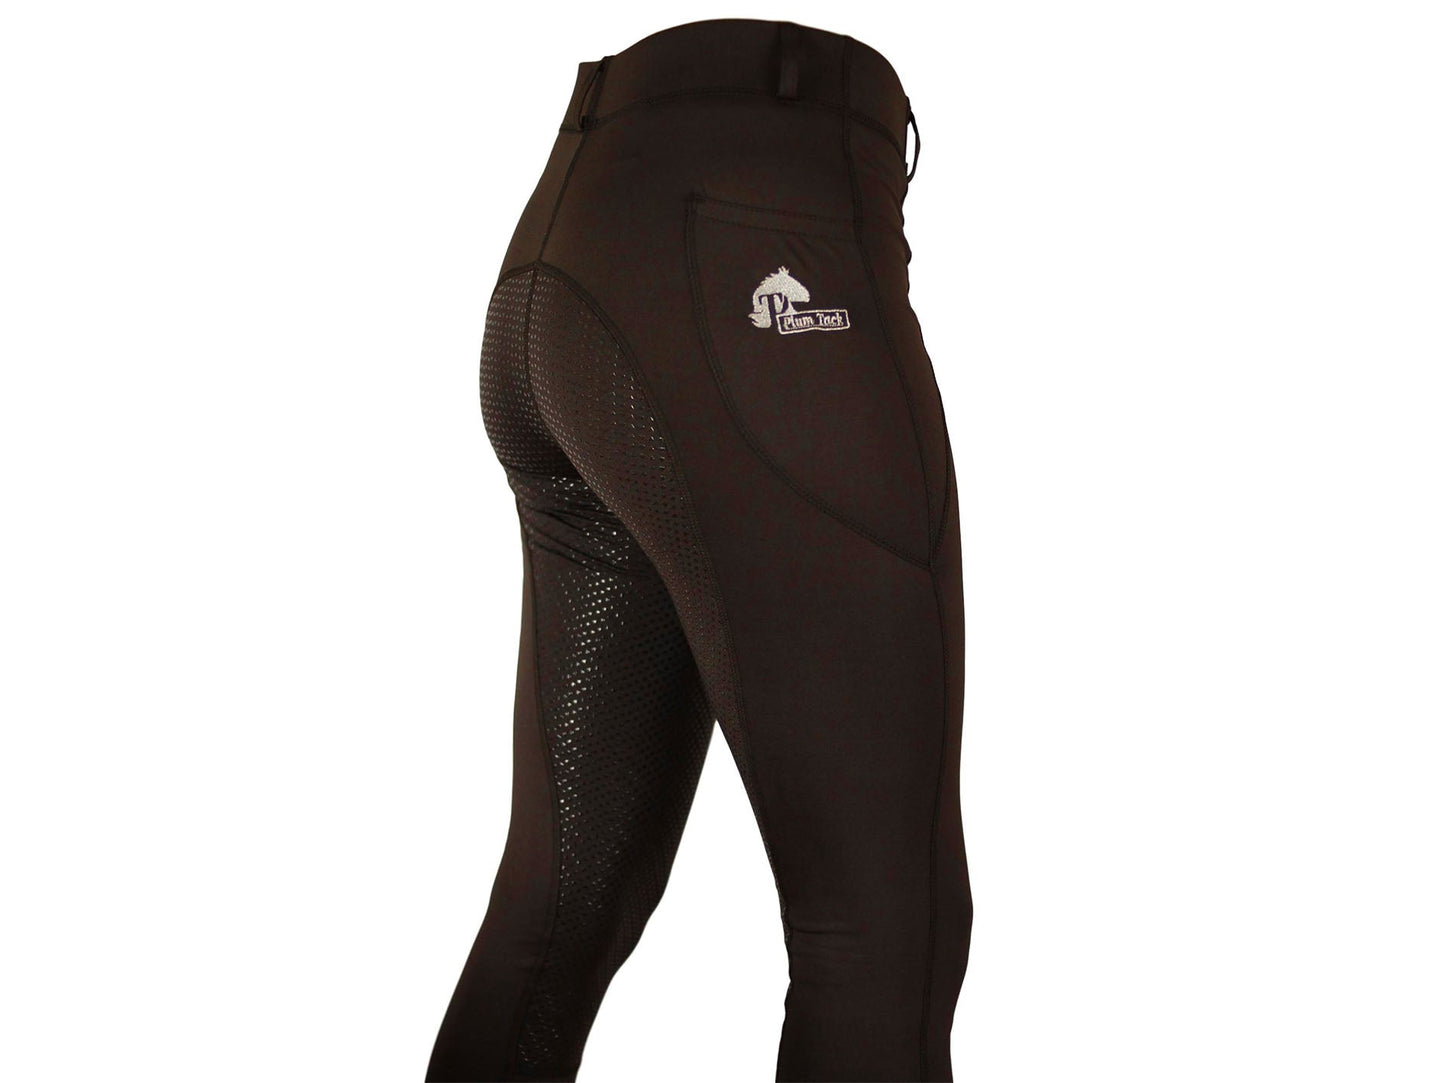 Side view of brown horse riding tights with mesh panels.